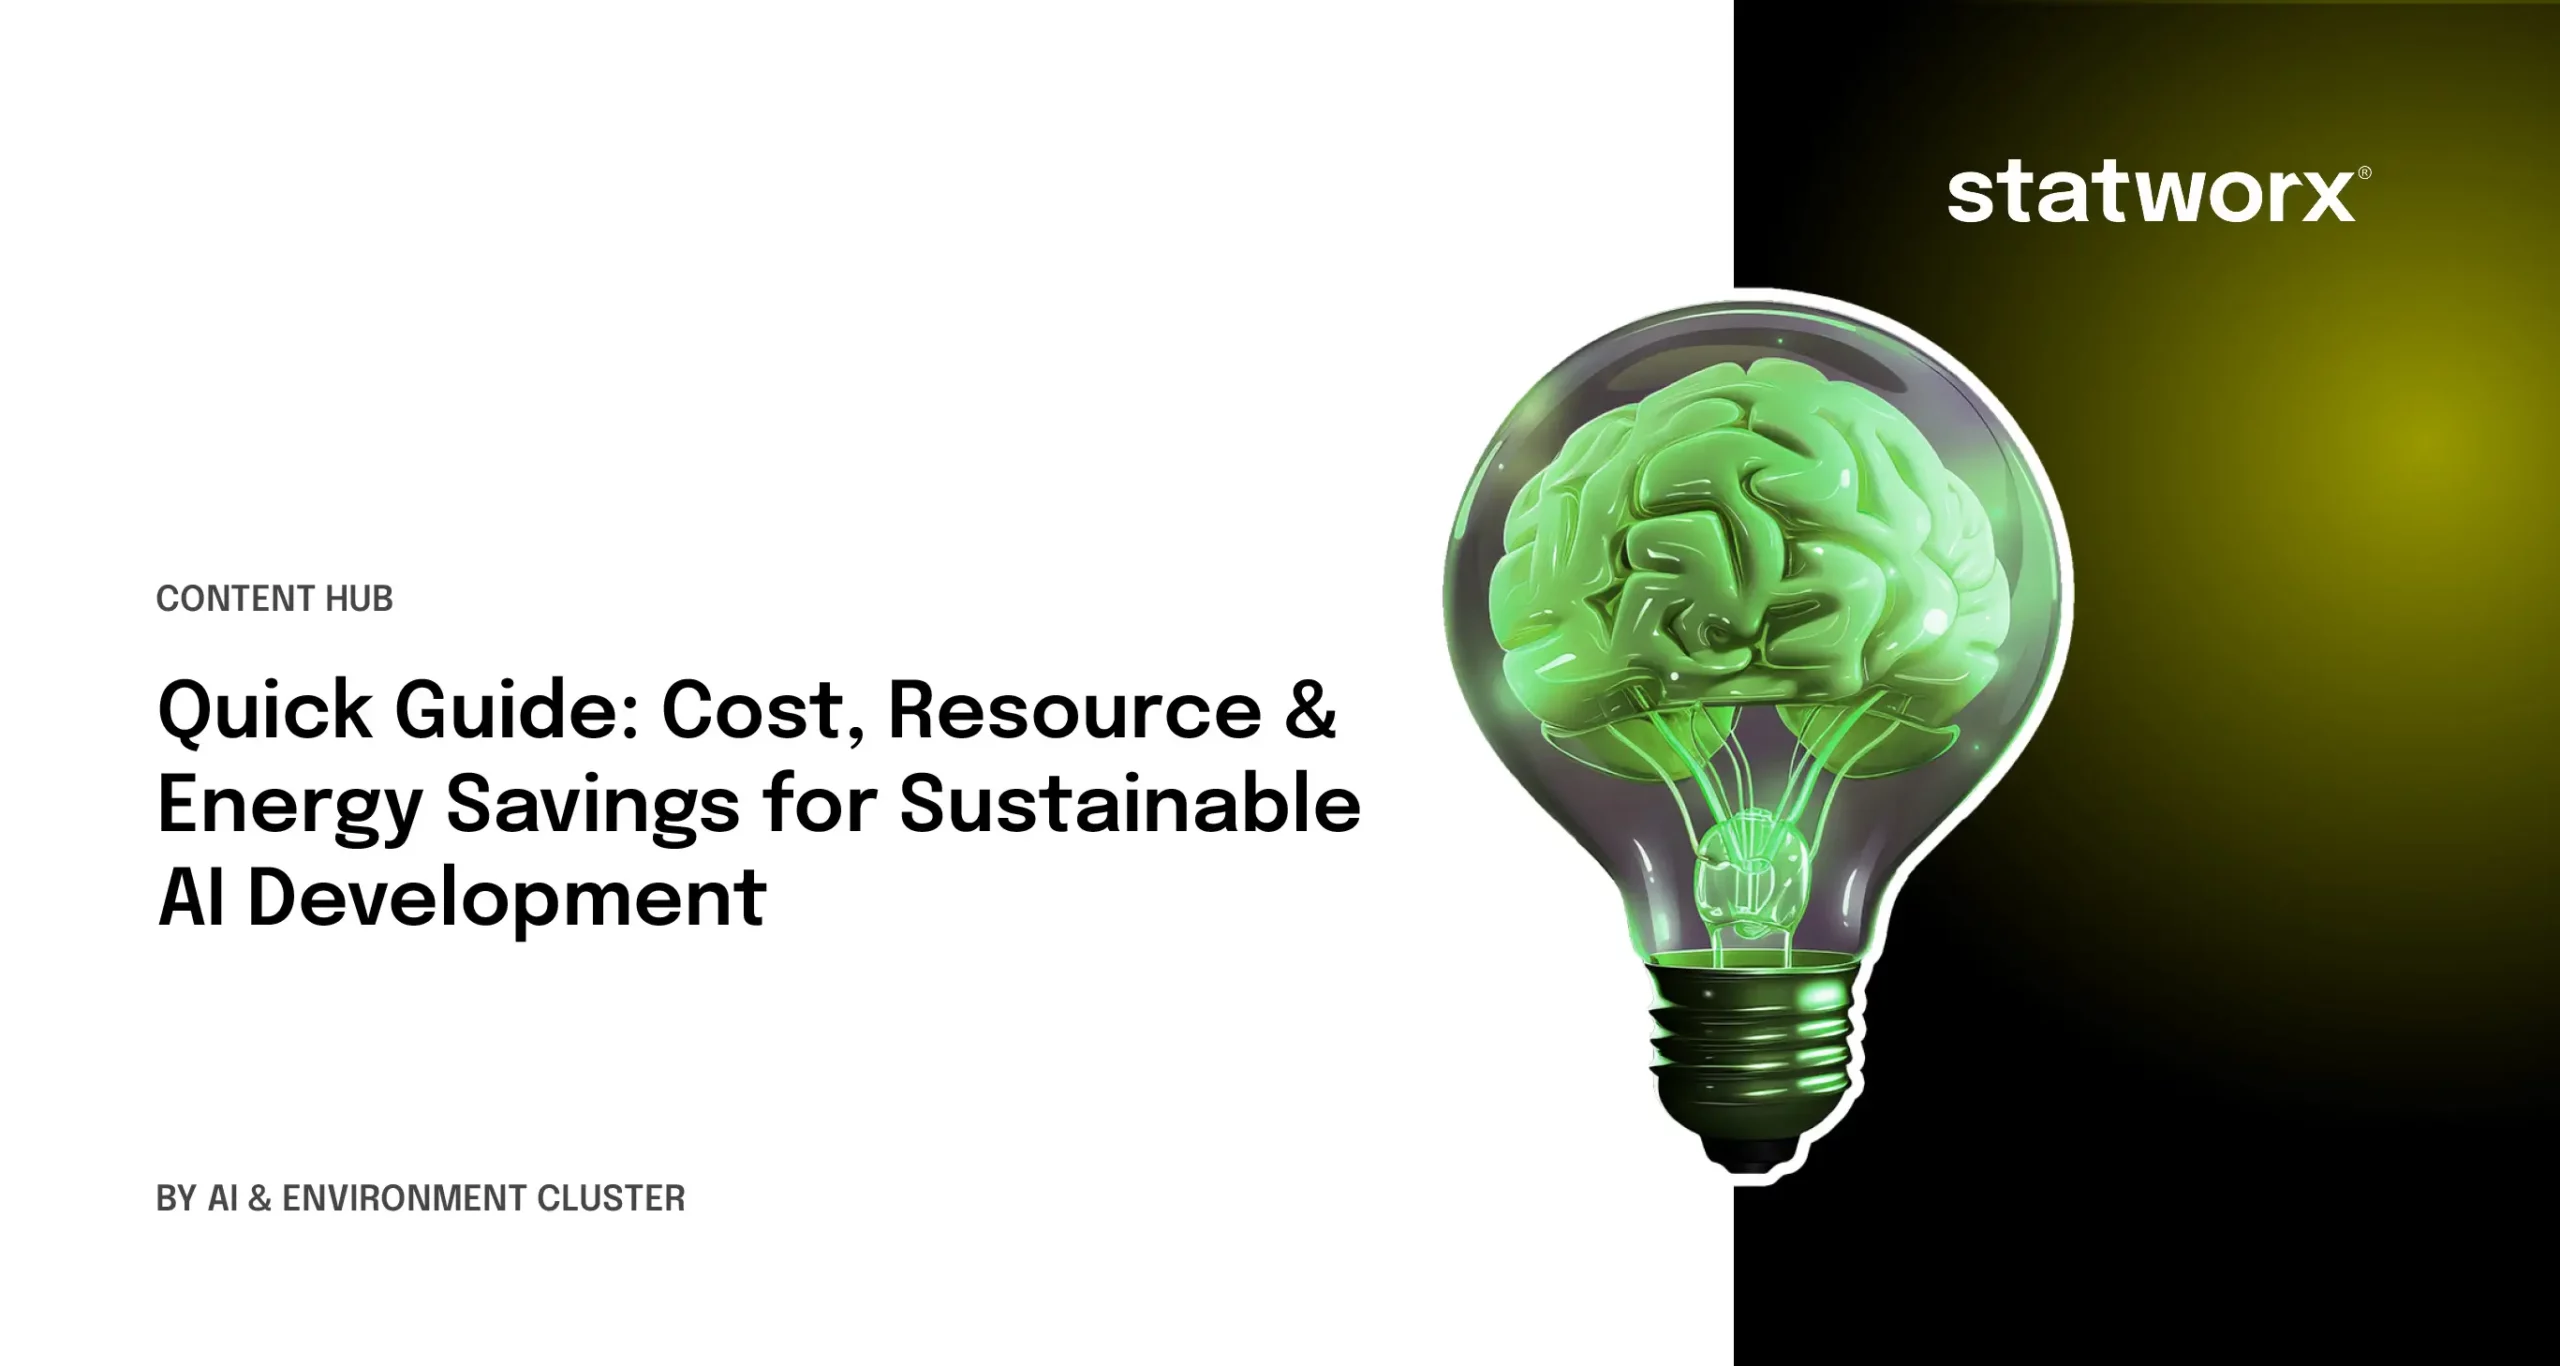 Quick Guide: Cost, Resource & Energy Savings for Sustainable AI Development